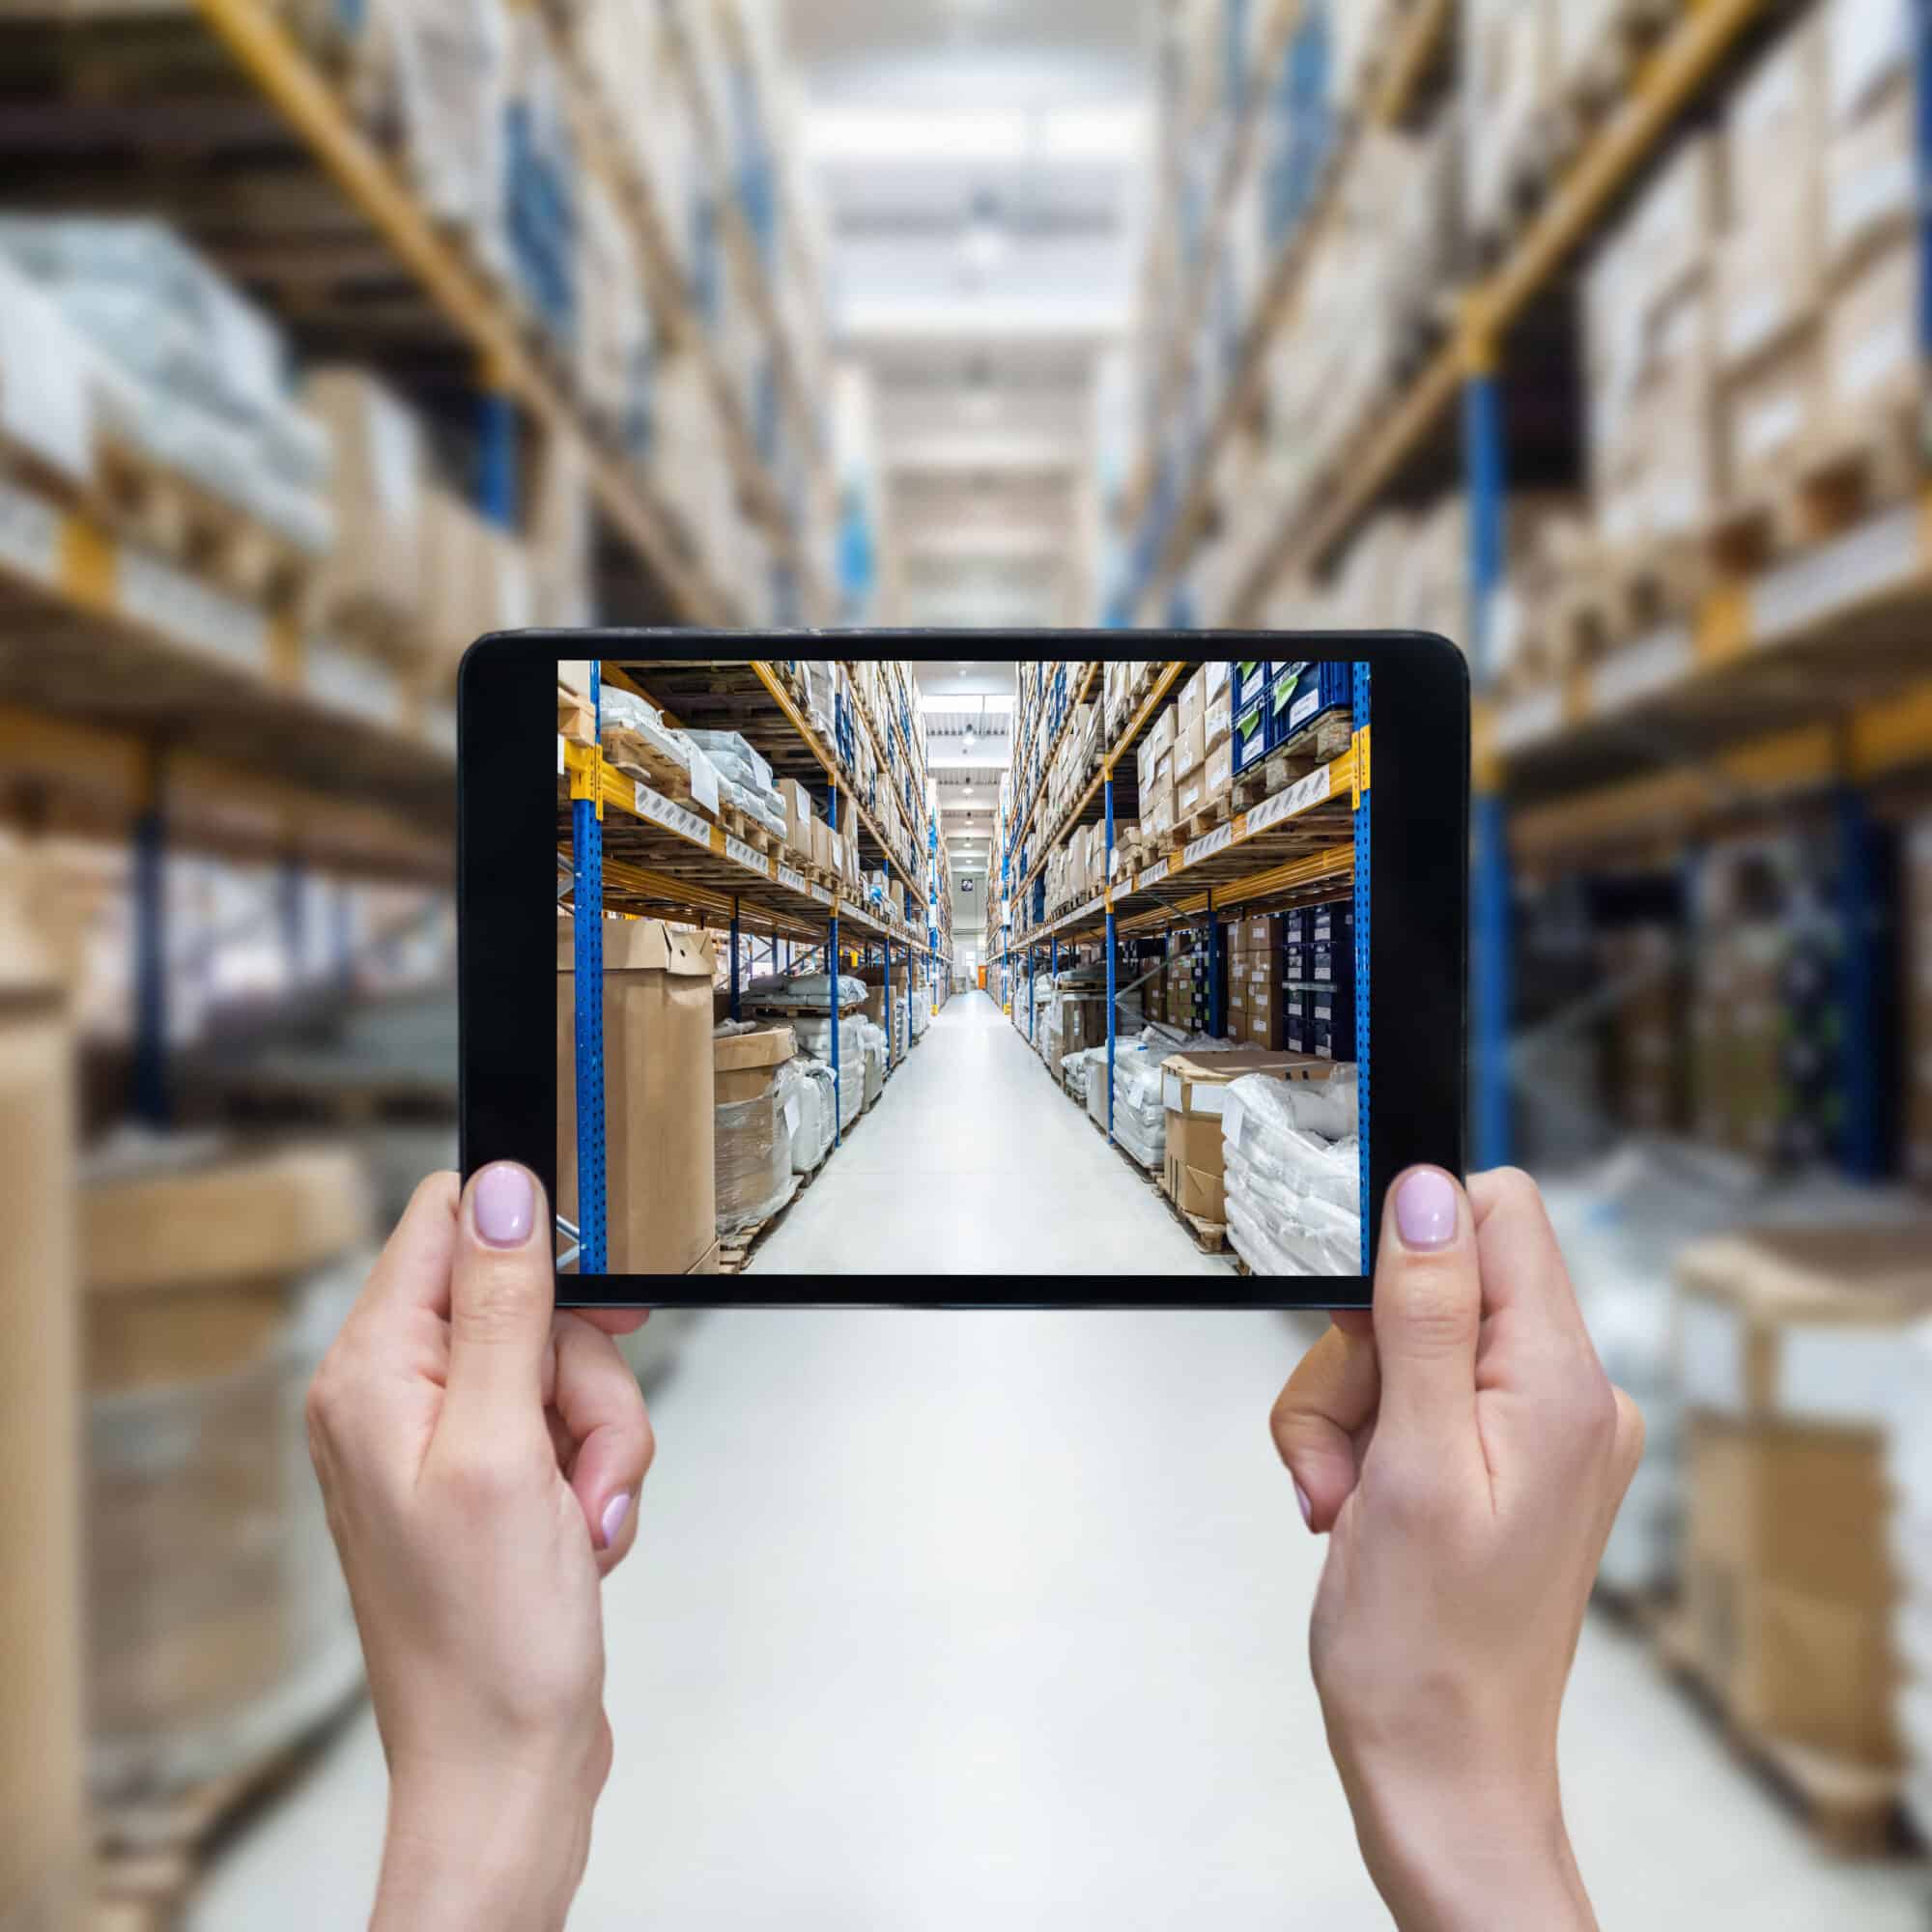 Horizontal color image of female hands holding a digital tablet in a corridor of futuristic distribution warehouse. Ordering on-line from a modern warehouse on a touchscreen tablet computer. Large distribution storage in background with racks full of packages, boxes, pallets, crates ready to be delivered. Logistics, freight, shipping, receiving.